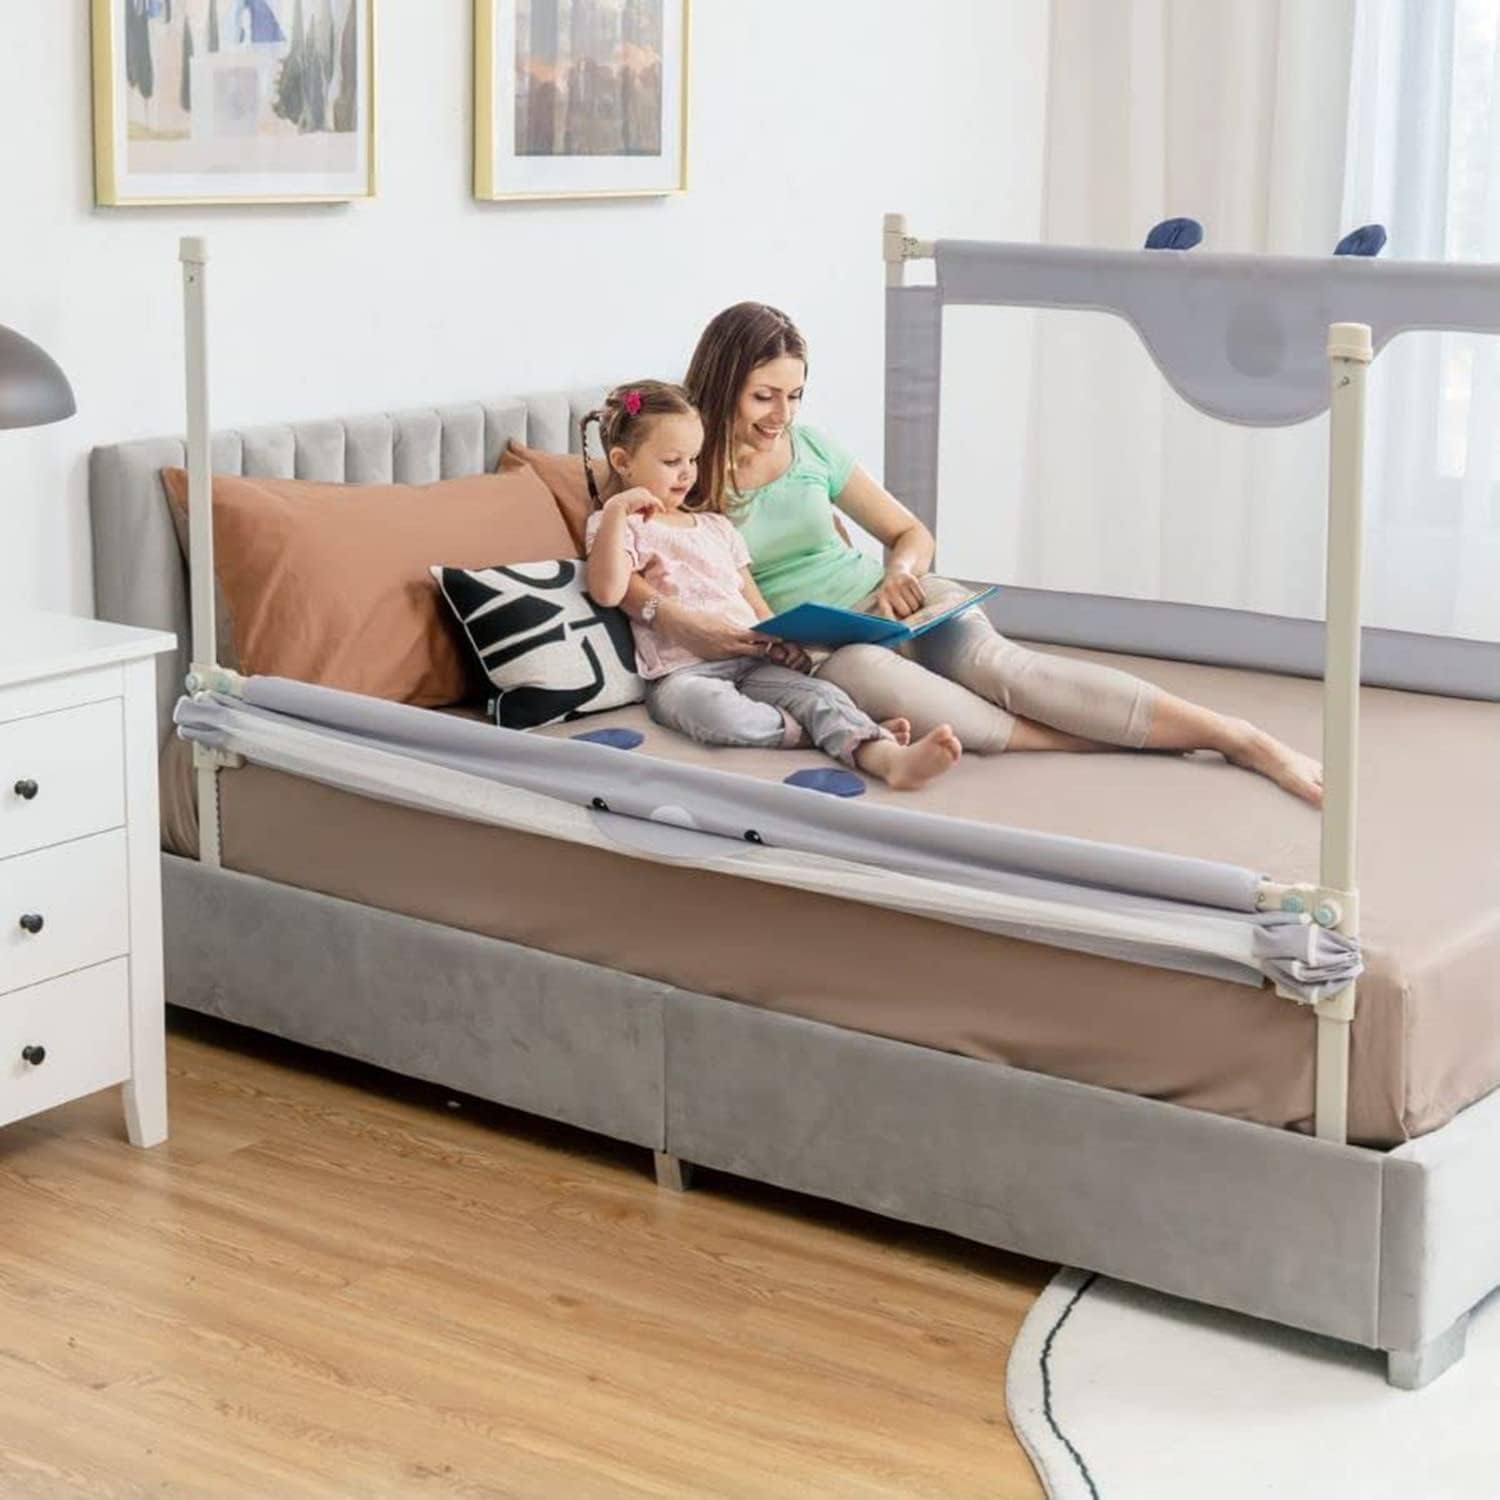 DMG Bed Rail for Toddlers, 69'' Vertical Lifting Baby Beds Guard with Double Safety Lock & Adjustable Height, Anti-Fall Protection Mesh Guardrail, Kids Bed Guard for Full Size Bed (Only 1 Side)